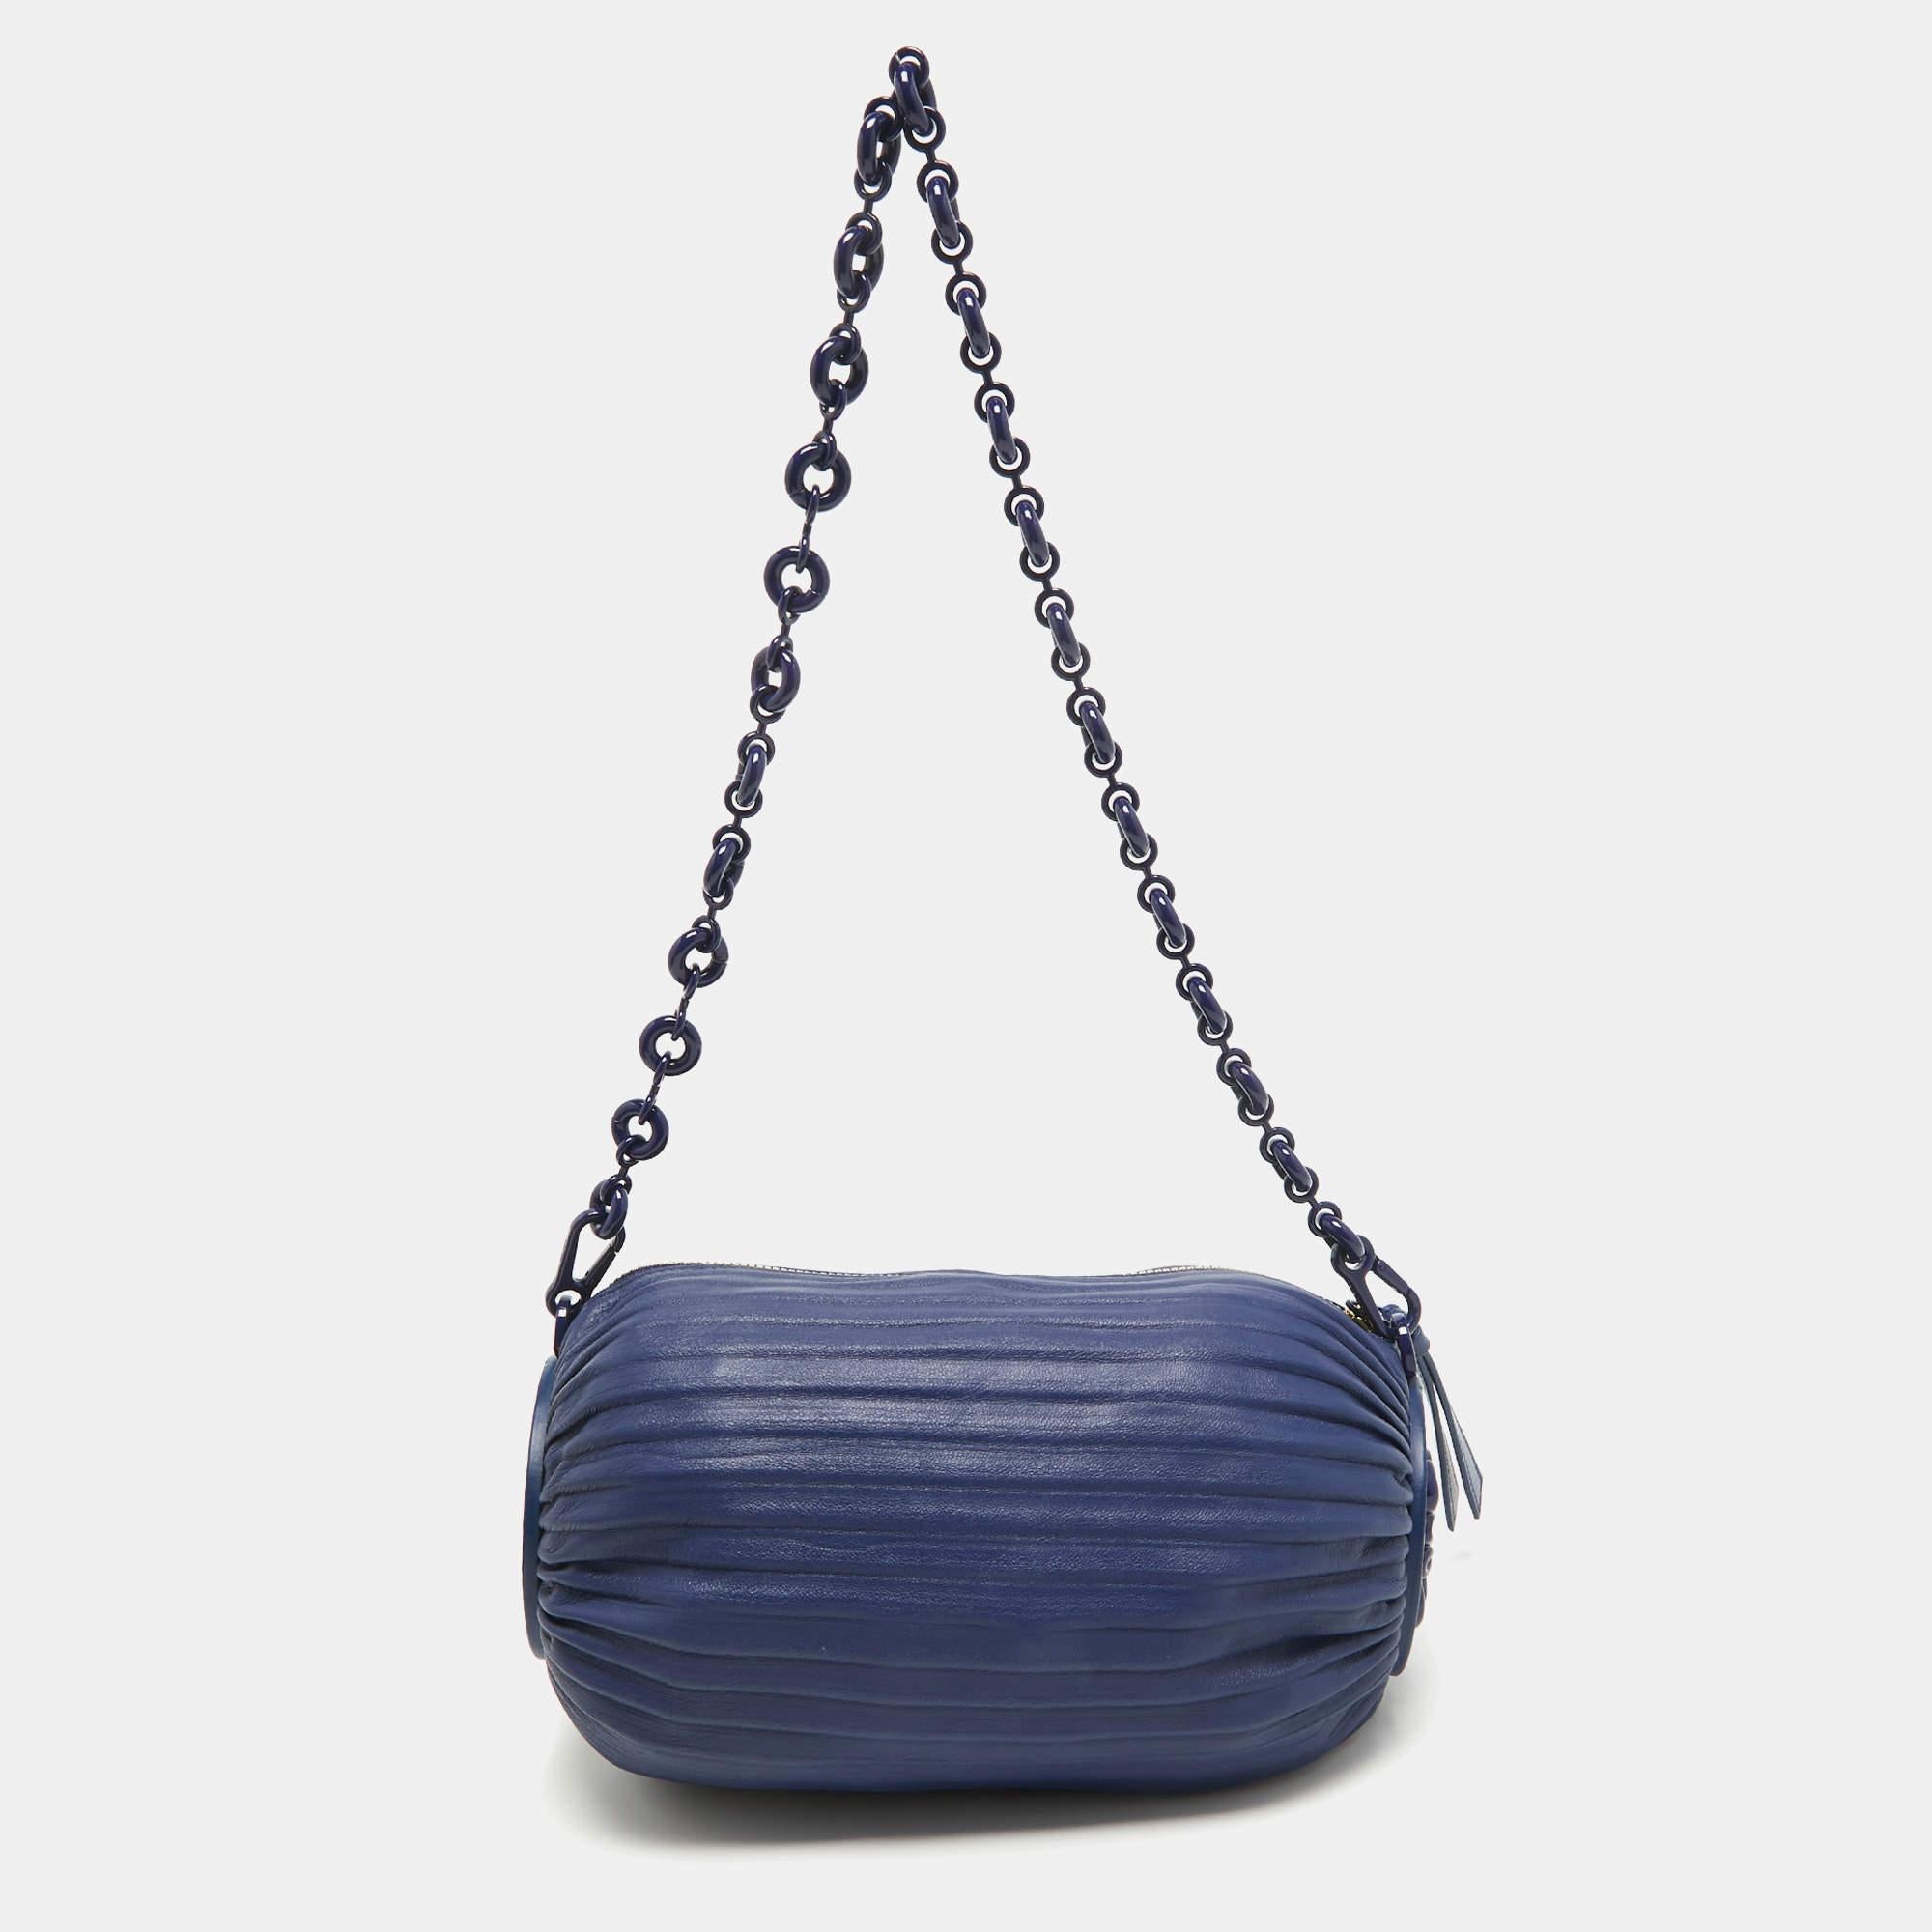 Crafted by Loewe, this exquisite blue leather pleated bracelet pouch bag seamlessly blends fashion and functionality. Its compact design features meticulous pleats, offering a tactile allure. The detachable strap allows versatile styling, while the